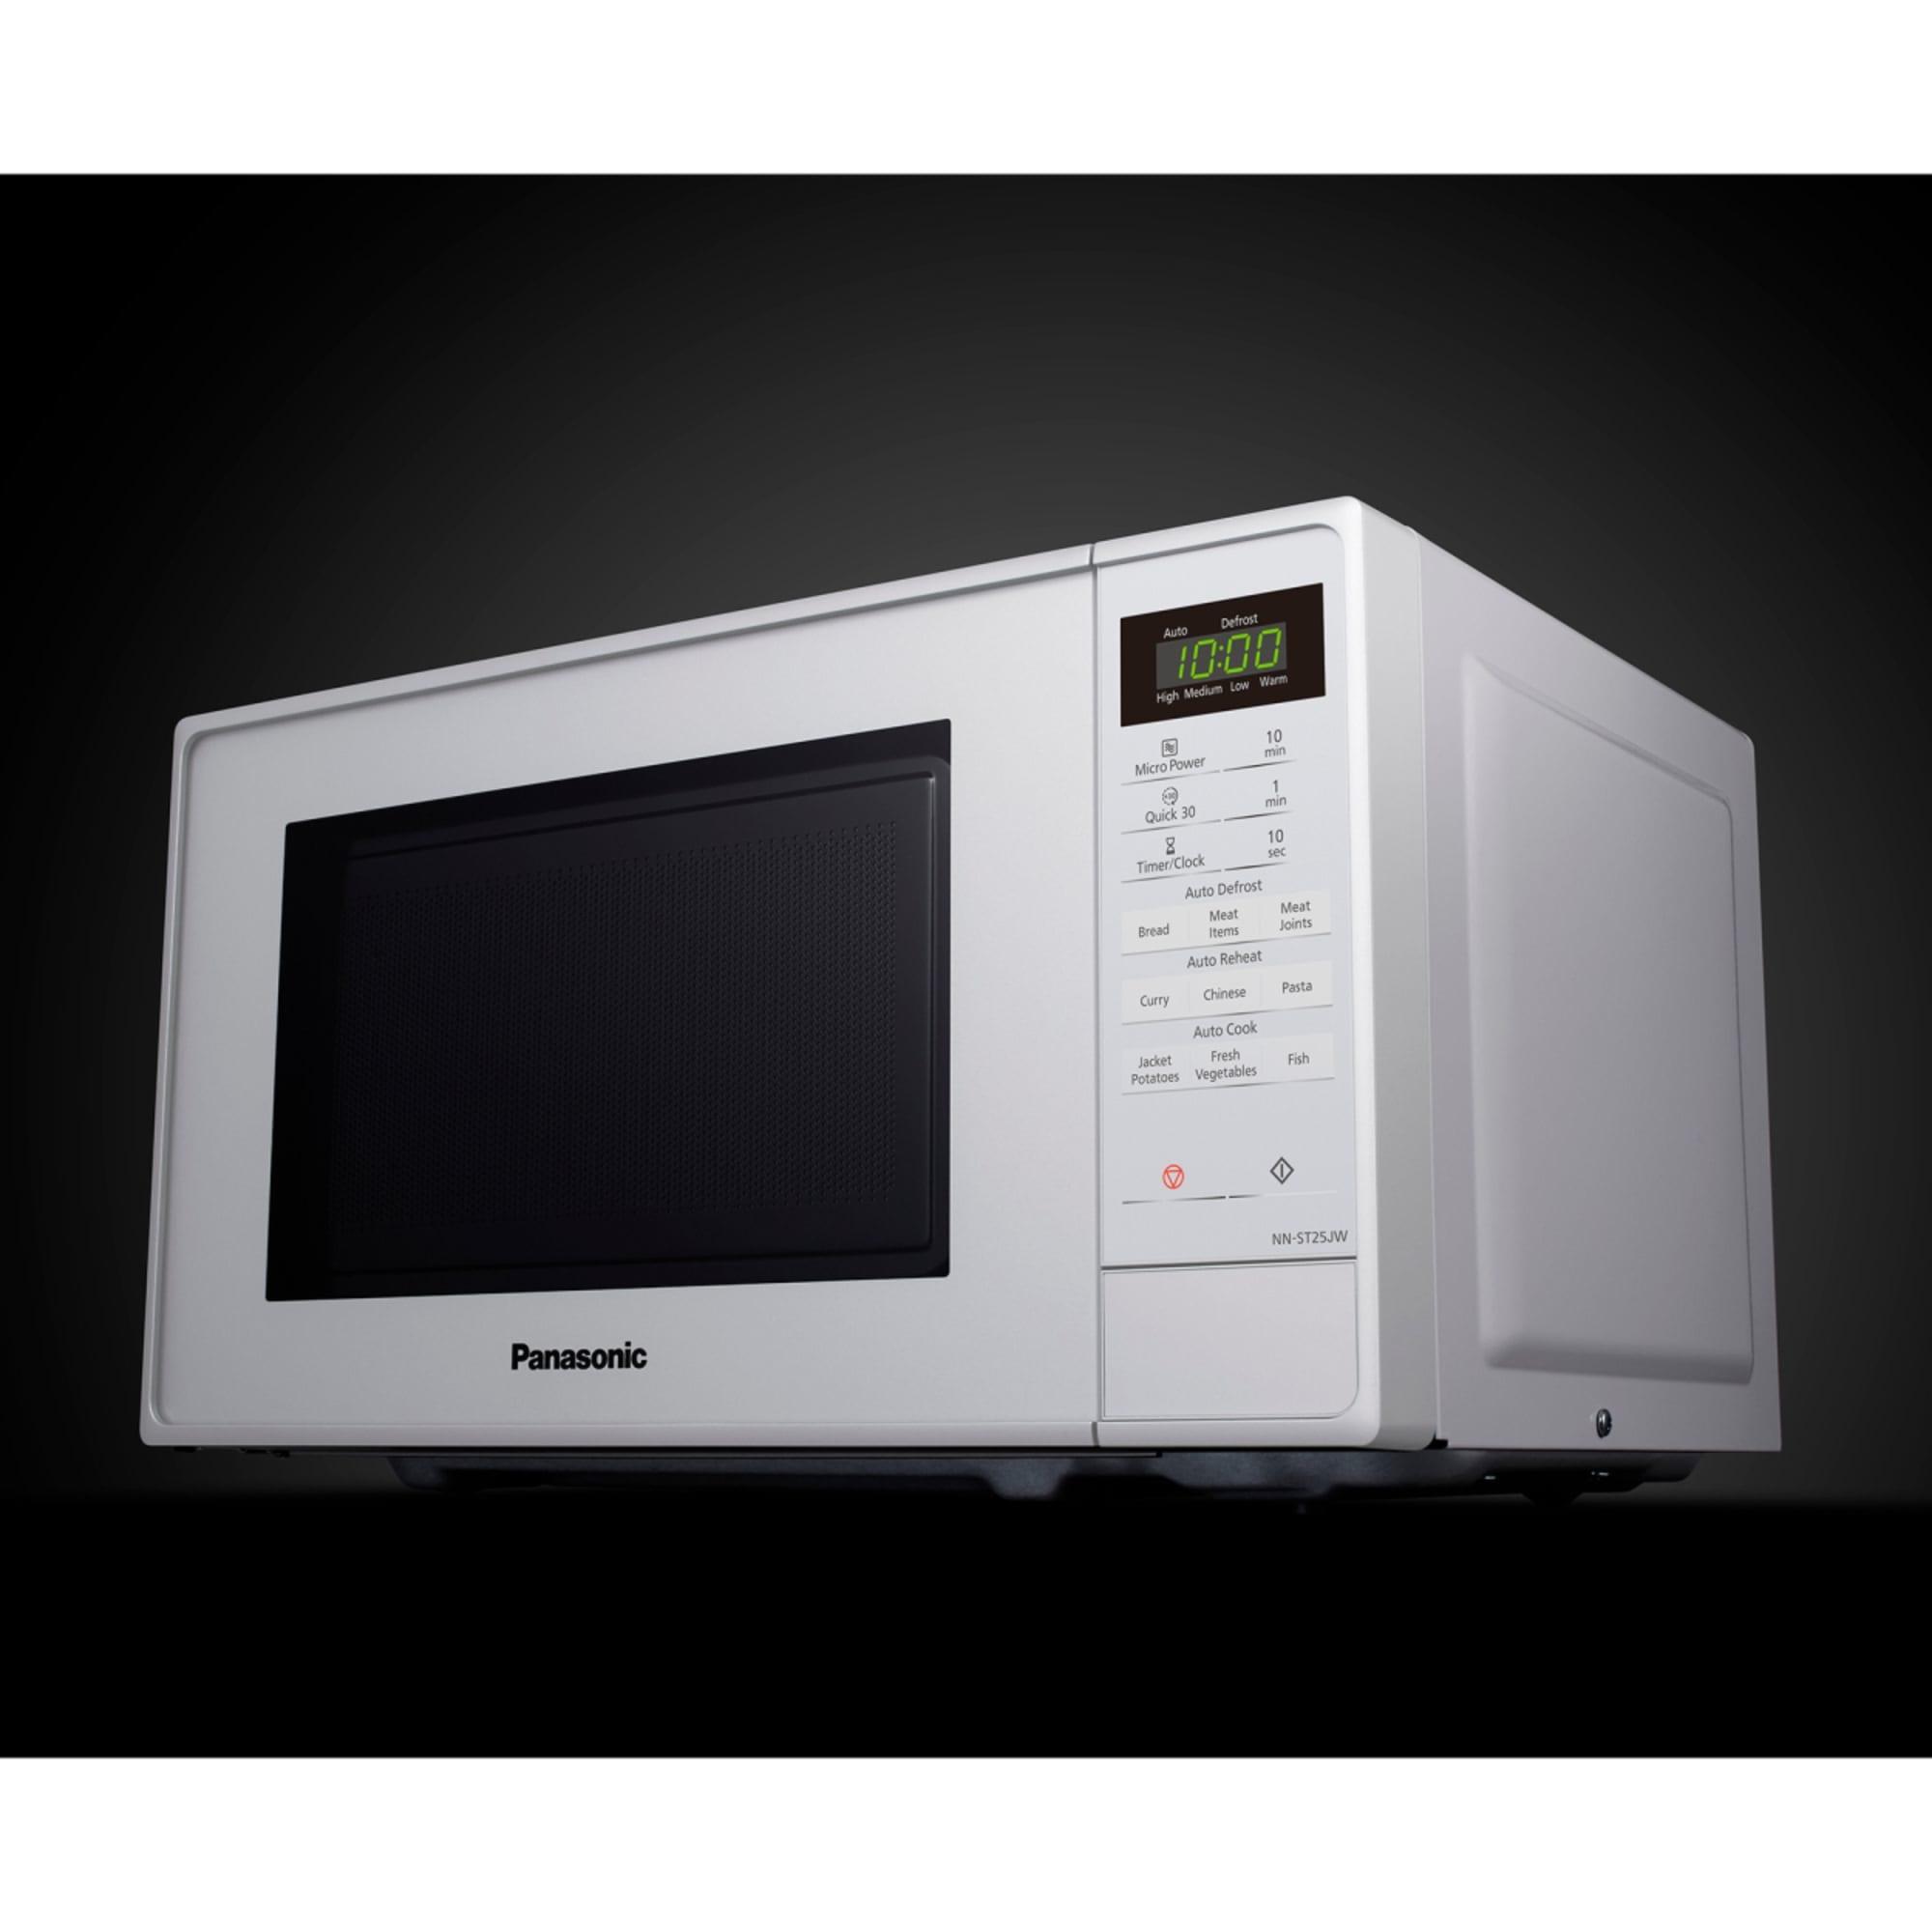 Panasonic Defrost Microwave Oven 20L White Image 5